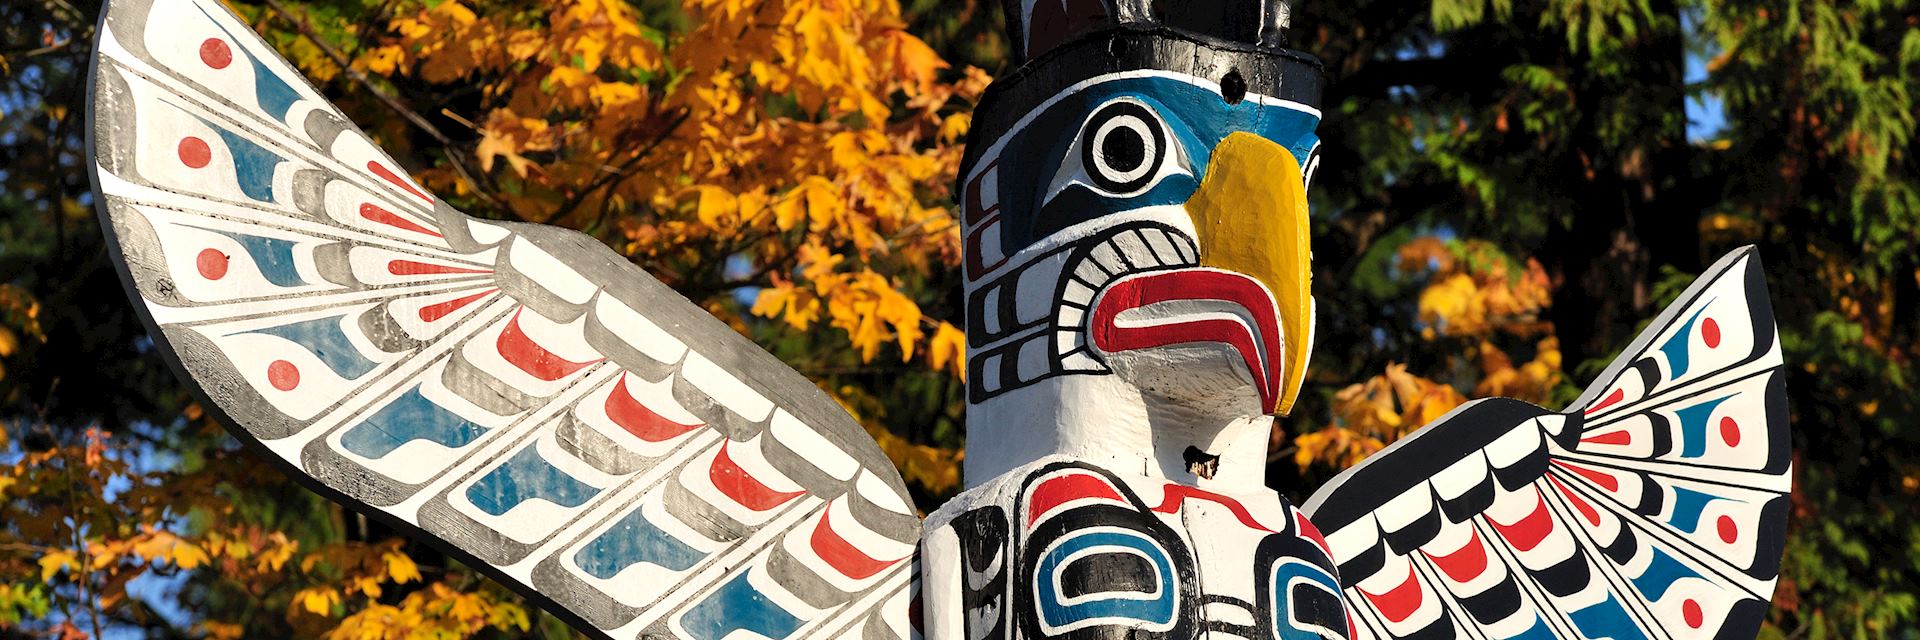 First Nations totem pole, Stanley Park